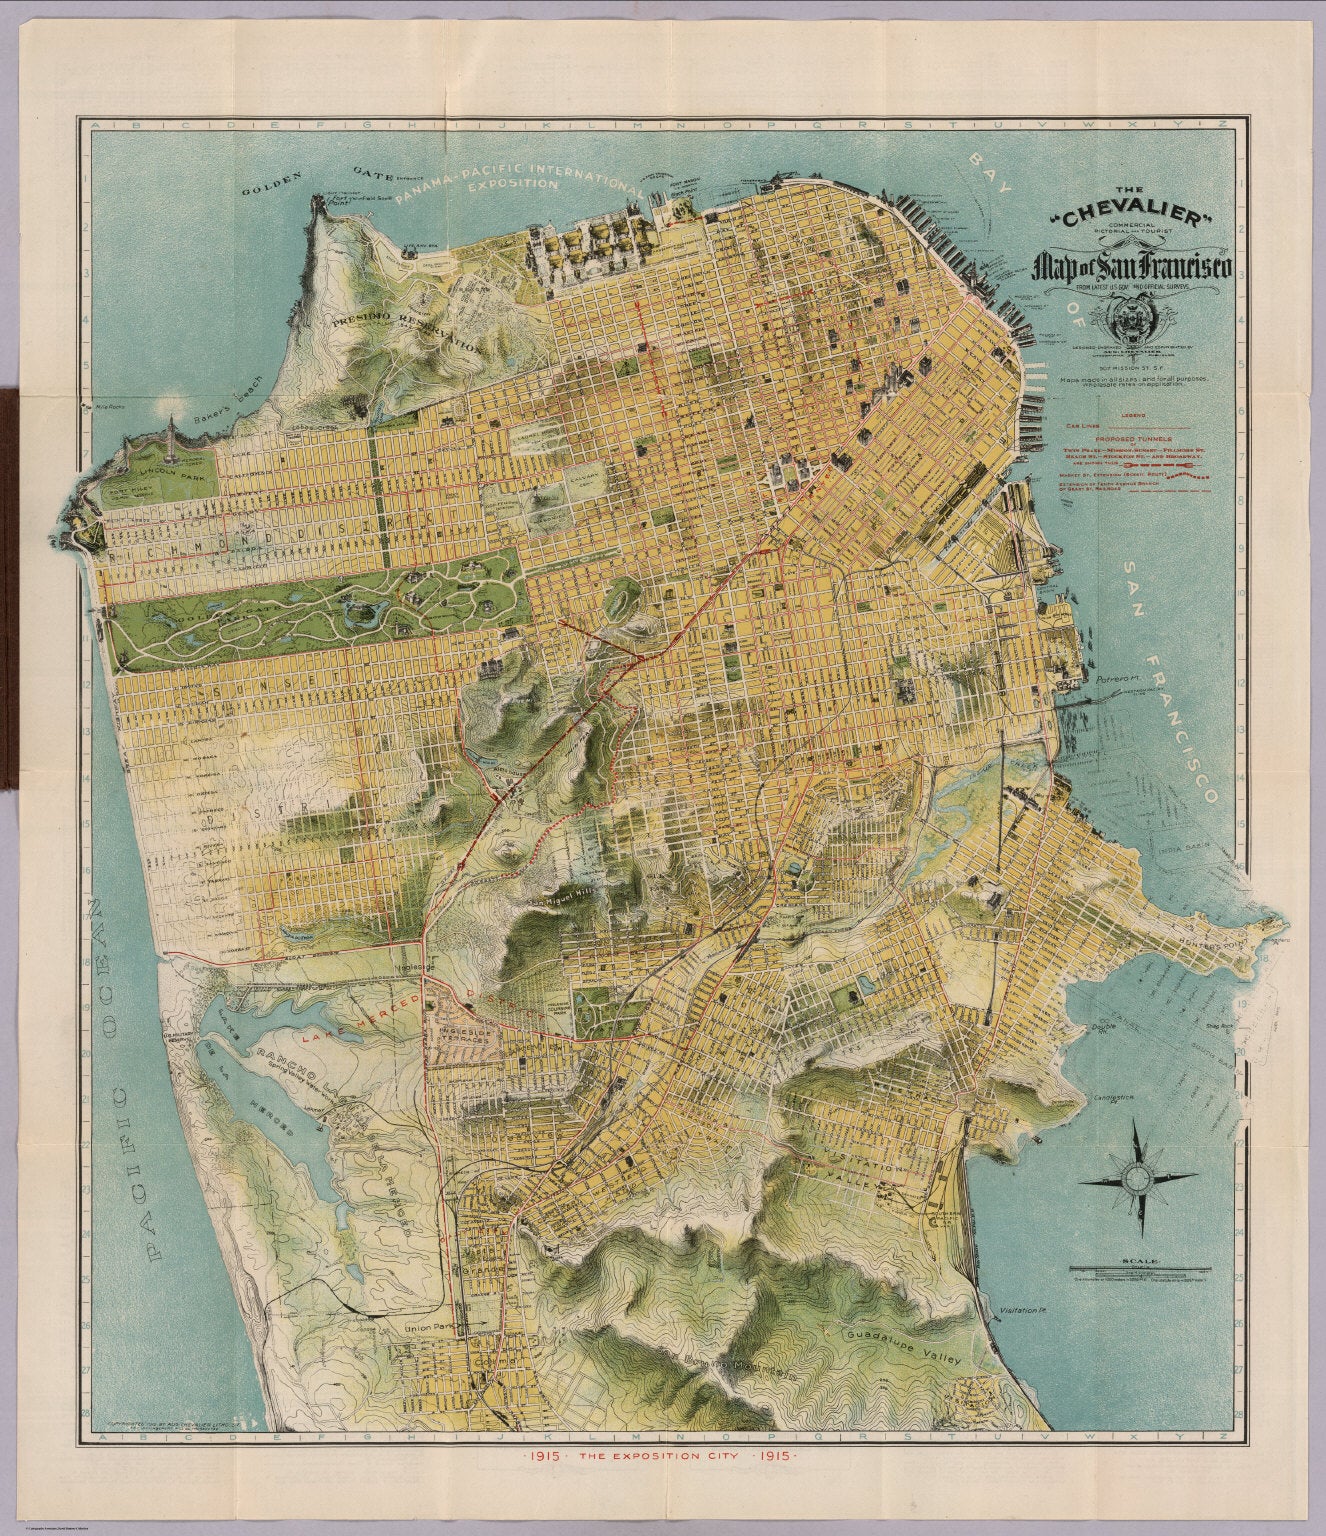 The “Chevalier” Commercial, Pictorial and Tourist Map of San Francisco  1915